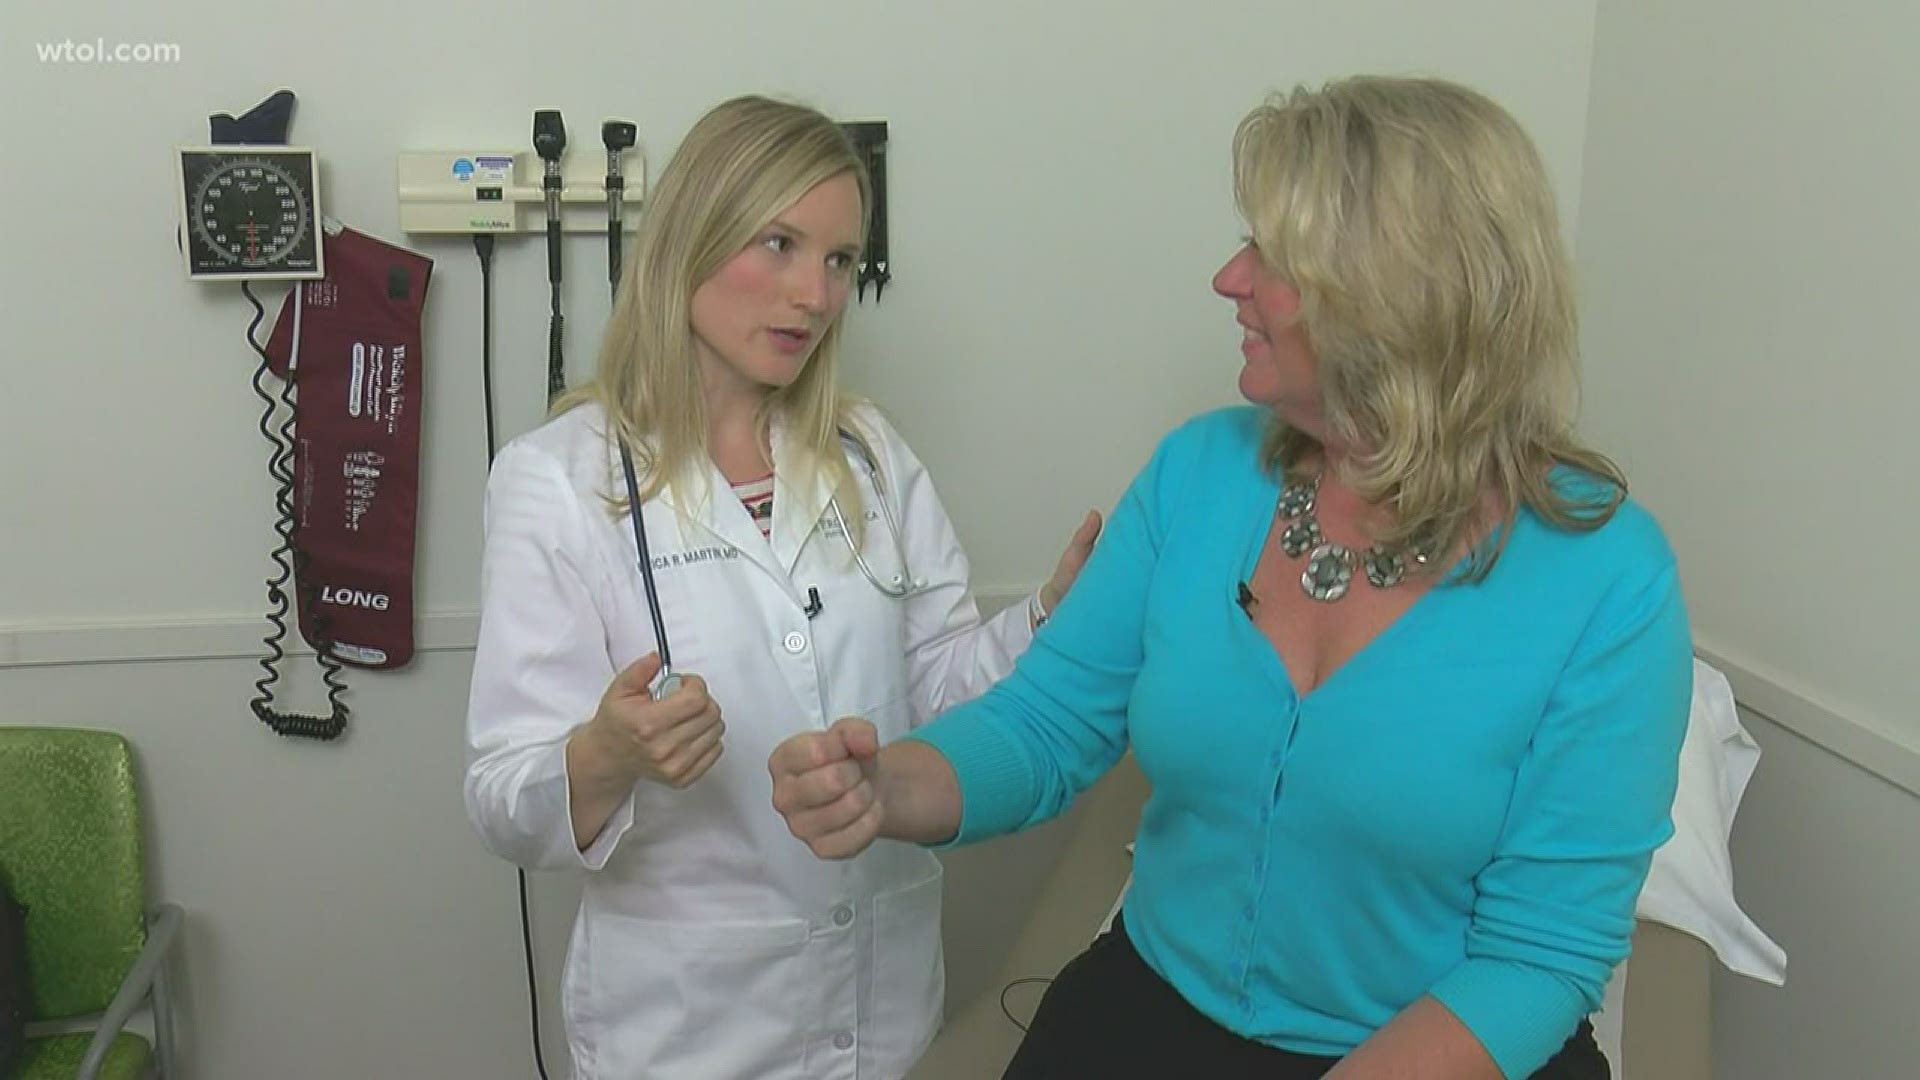 Are you feeling achy in your joints? It might be arthritis. Our Super Fitness Weight Loss Challenge host Kelly Heidbreder gets a check-up with our ProMedica doctors.